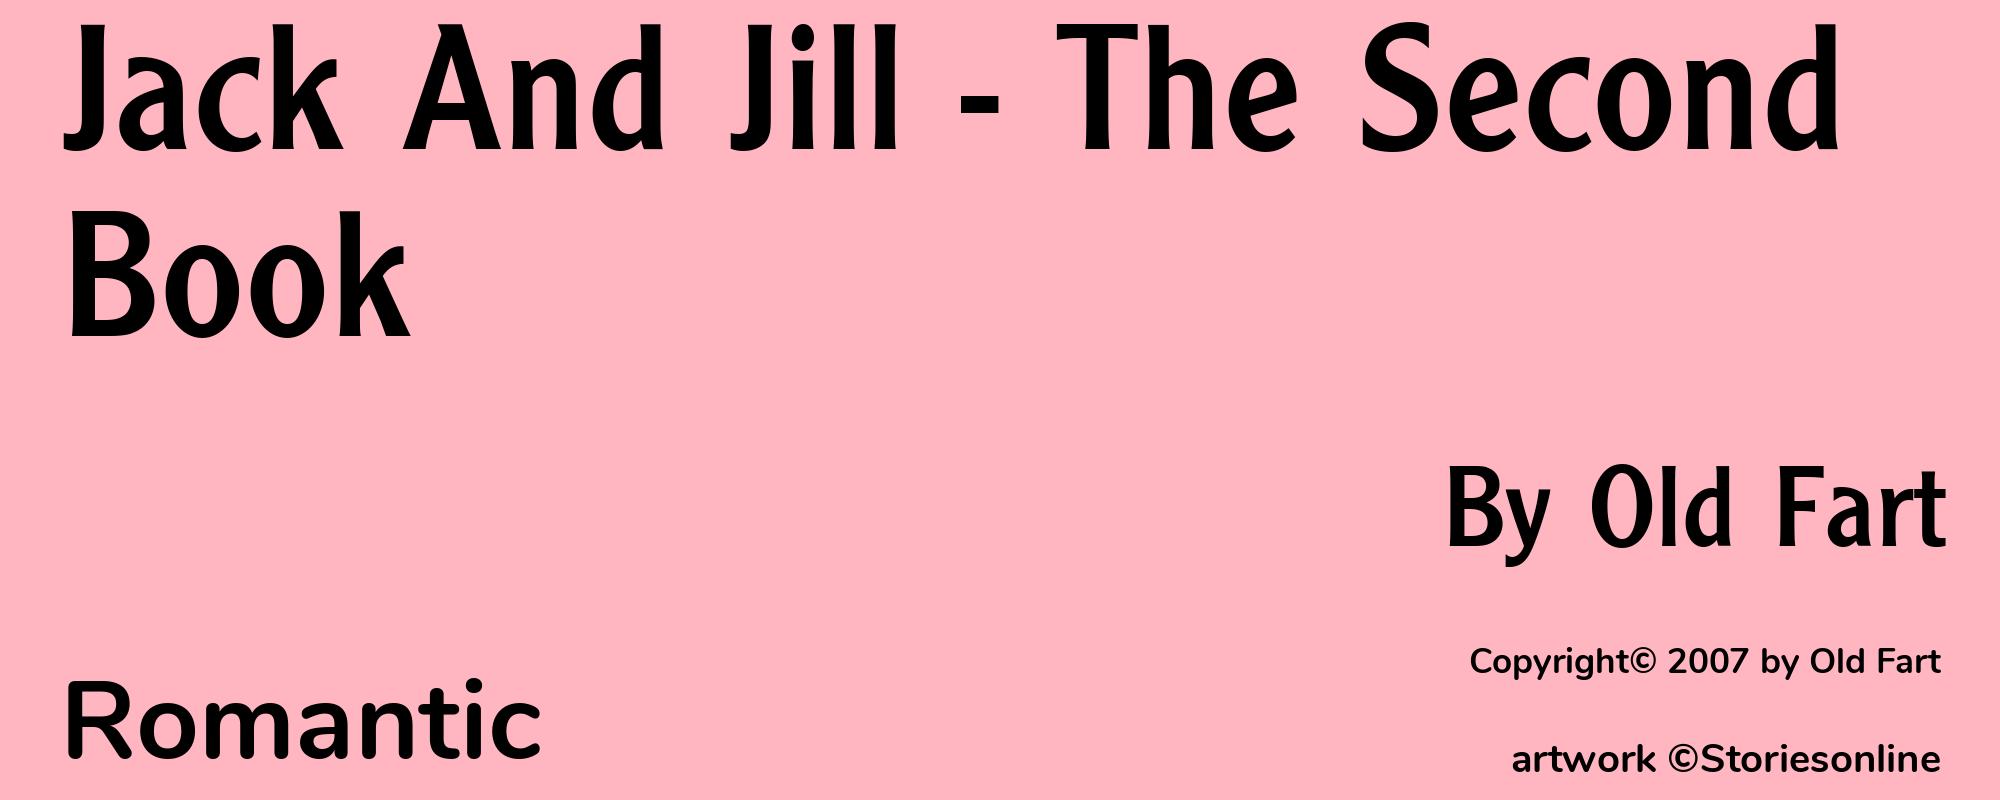 Jack And Jill - The Second Book - Cover